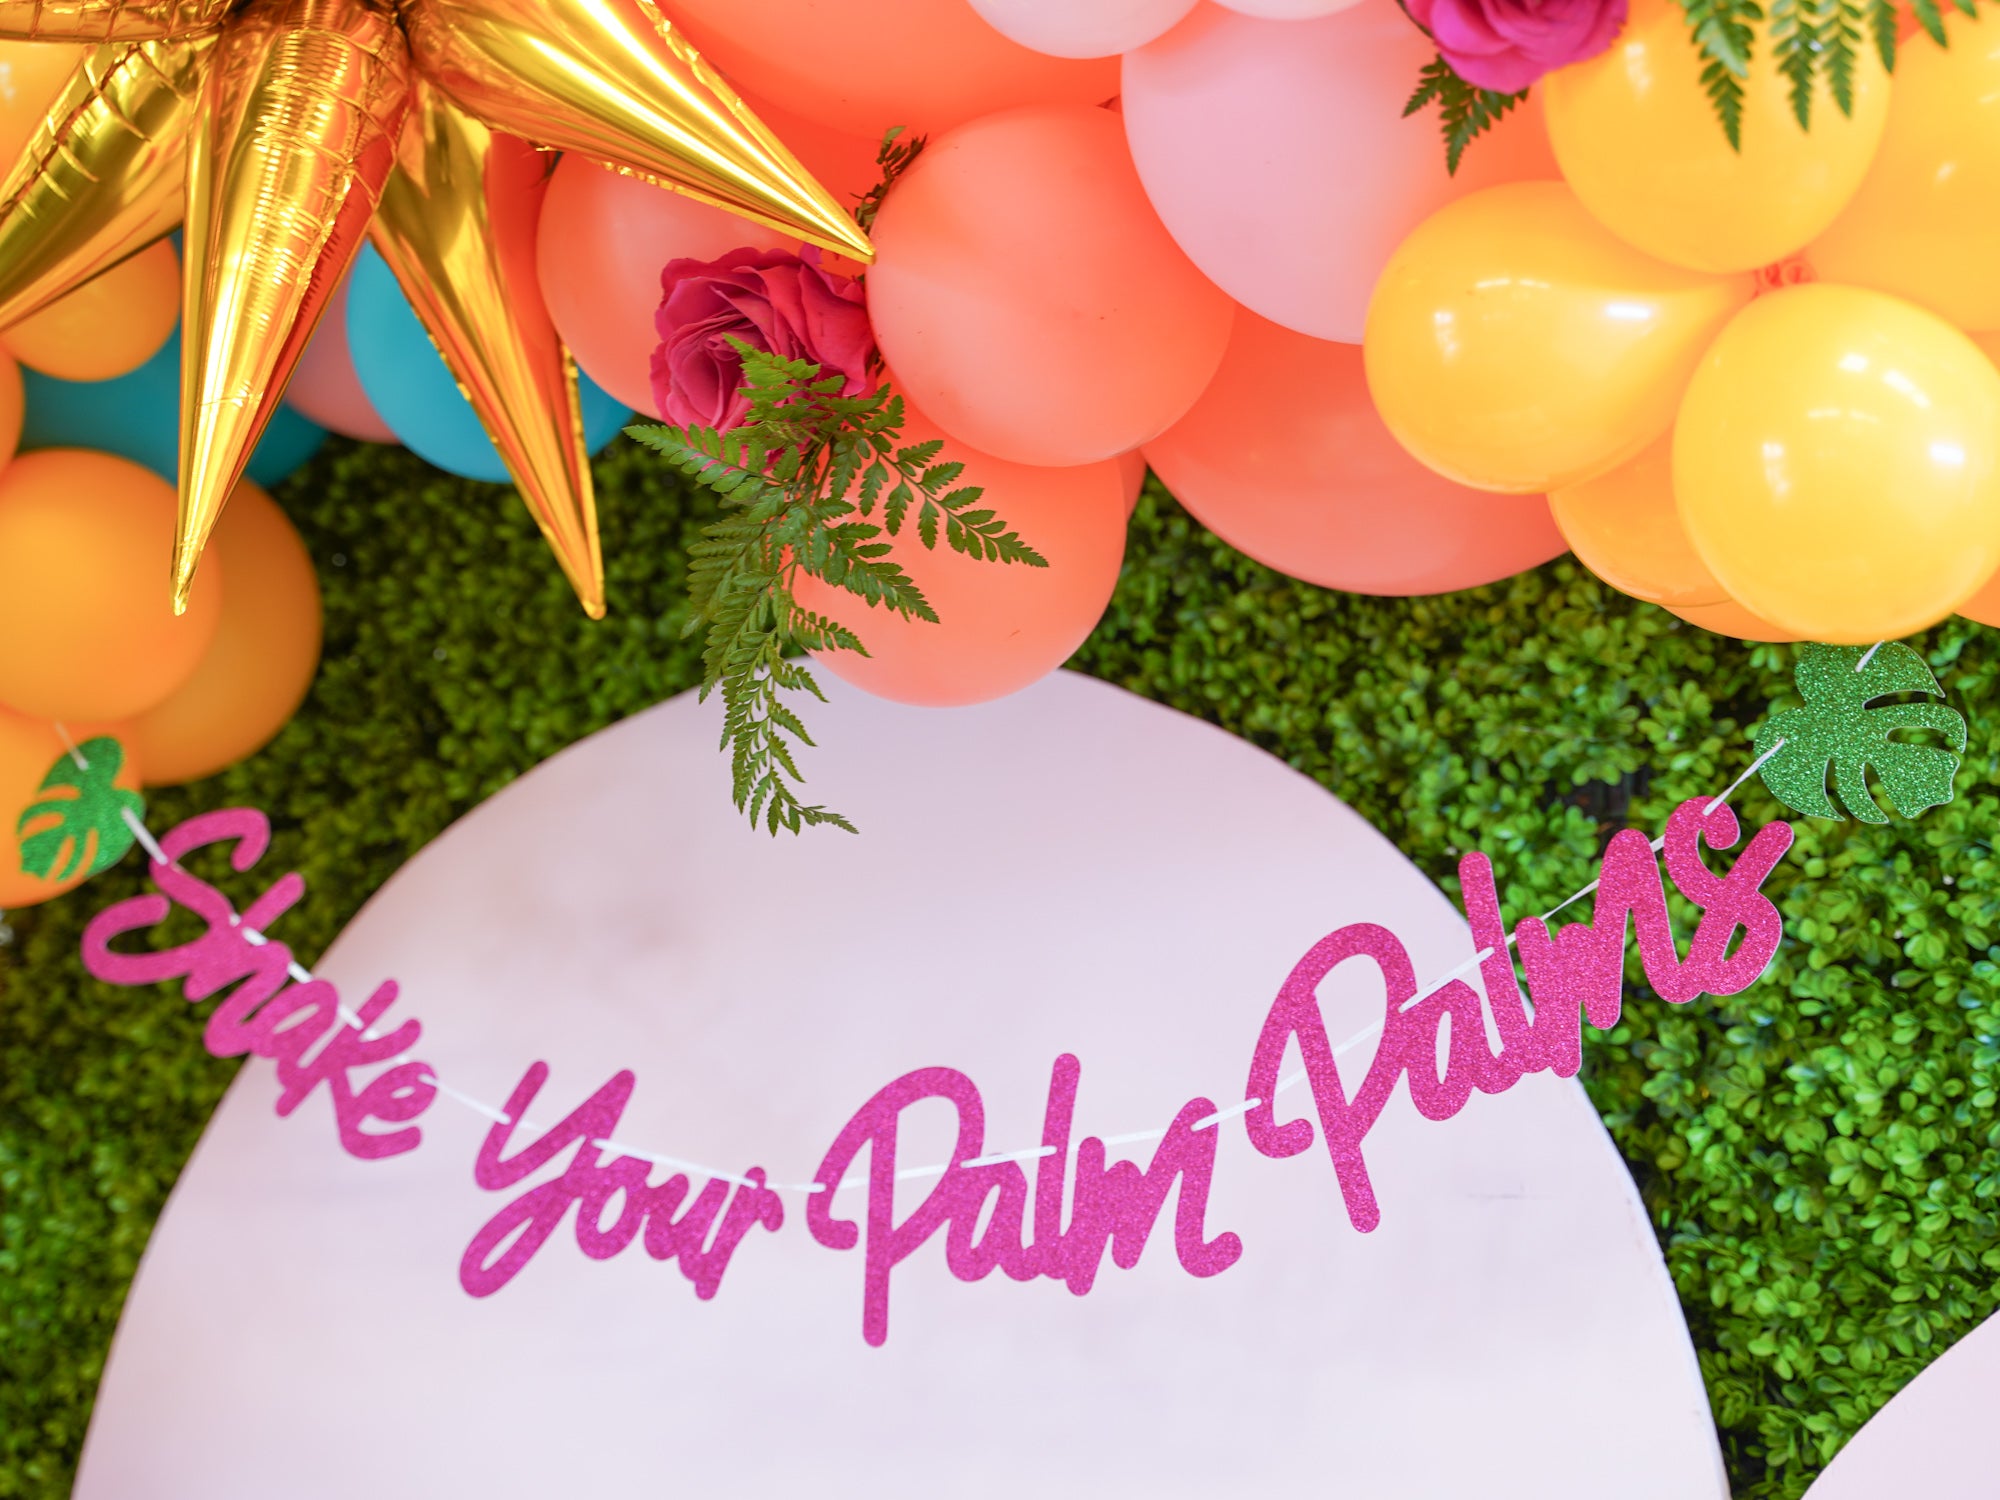 Shake Your Palm Palms Banner for a Tropical Party | The Party Darling